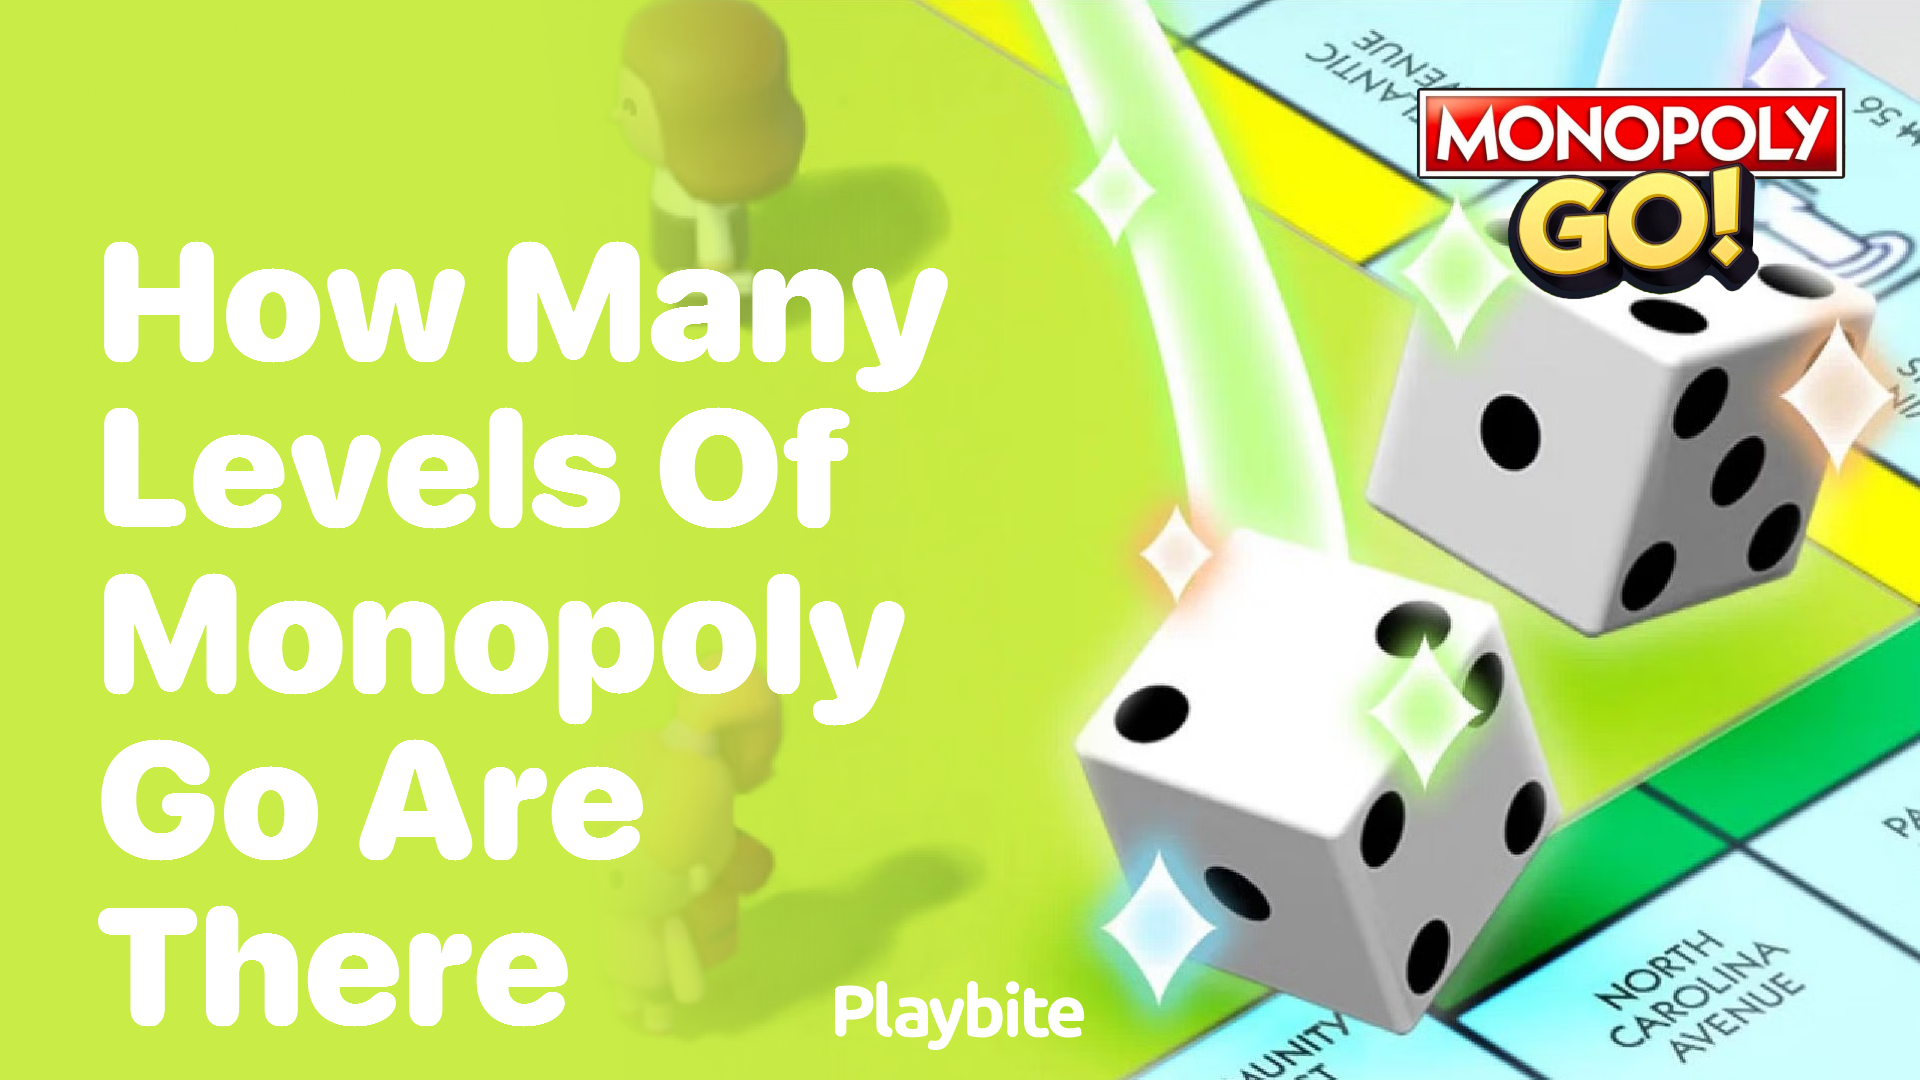 How Many Levels of Monopoly Go Are There?